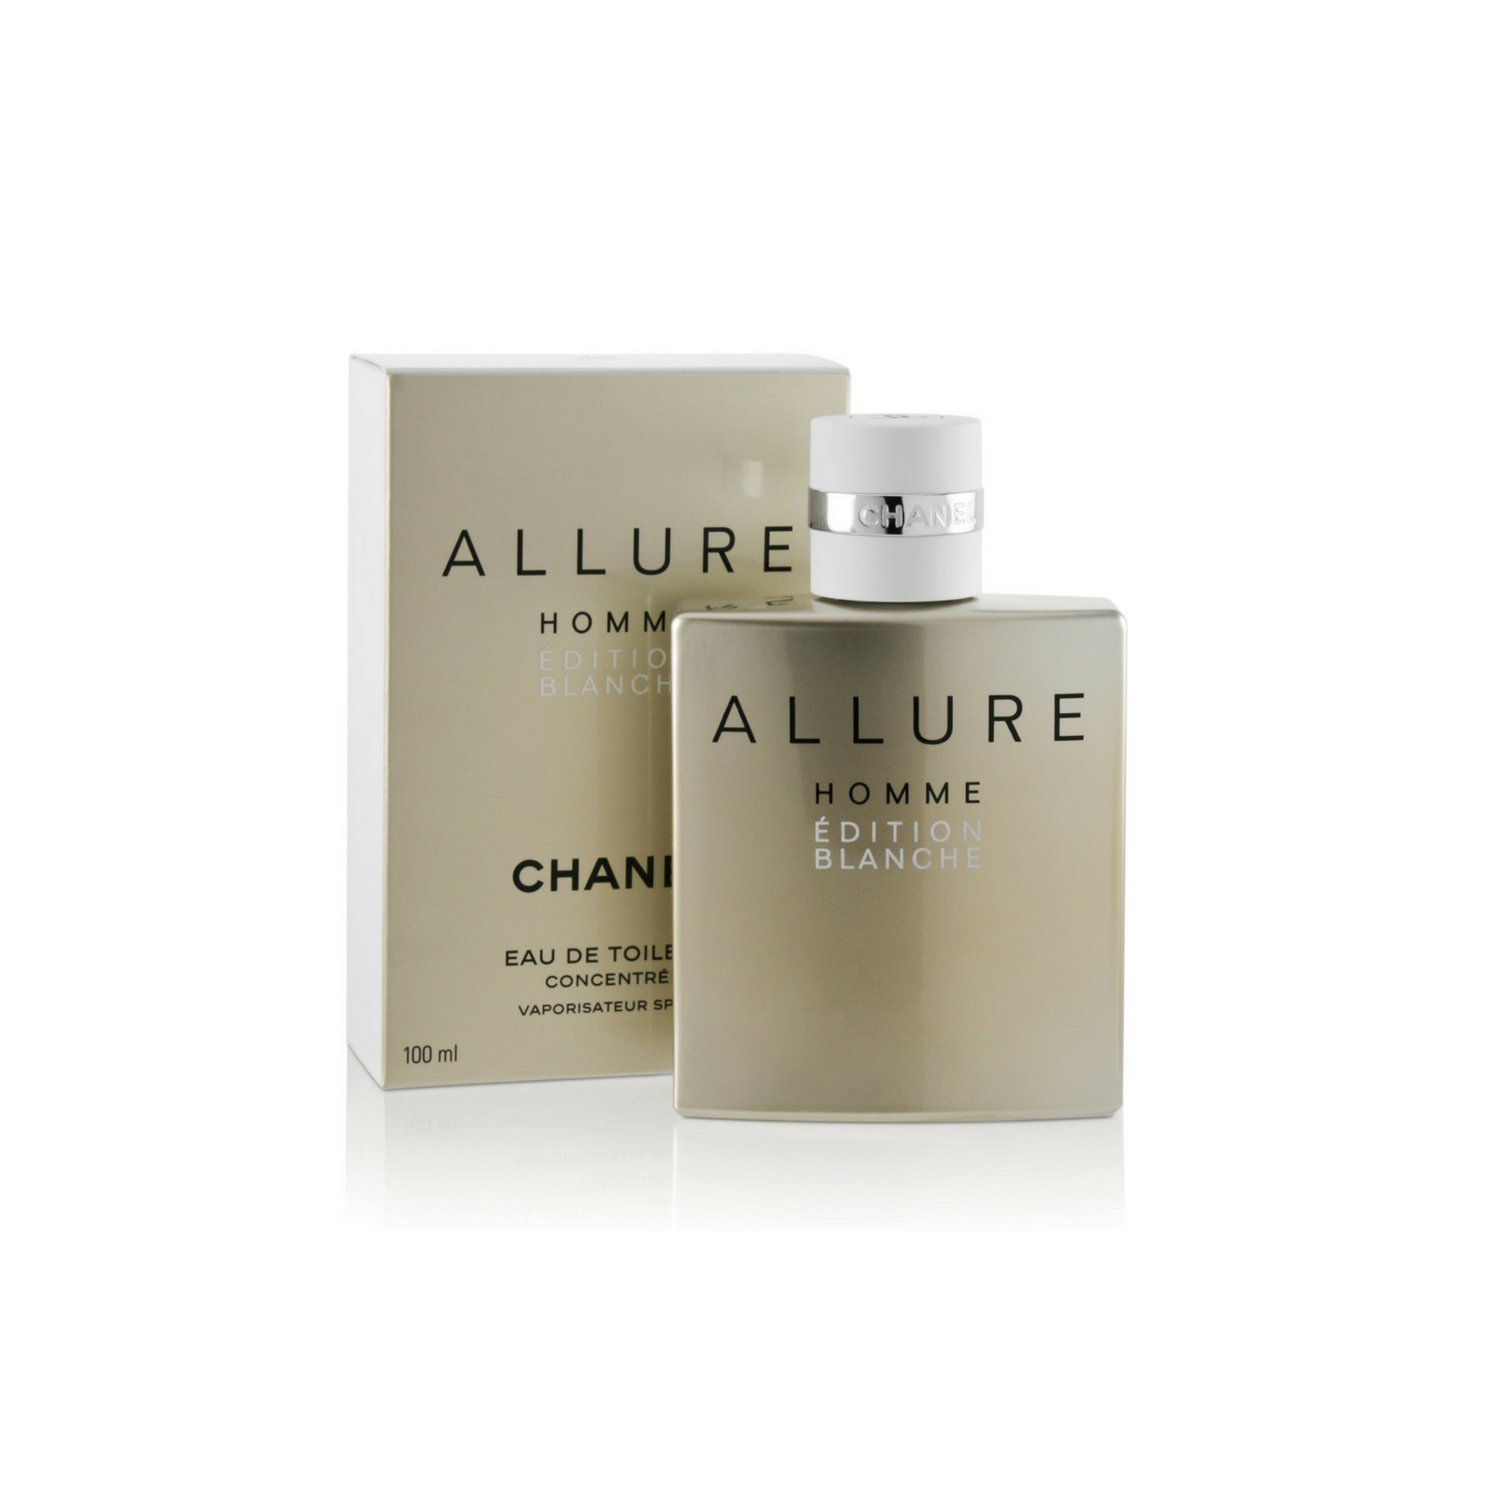 Chanel homme edition blanche. Chanel Allure homme Edition Blanche. Шанель Аллюр Бланш. Chanel мужские. Allure homme Edition Blanche. Chanel Allure homme Edition Blanche парфюмерная вода 100мл.